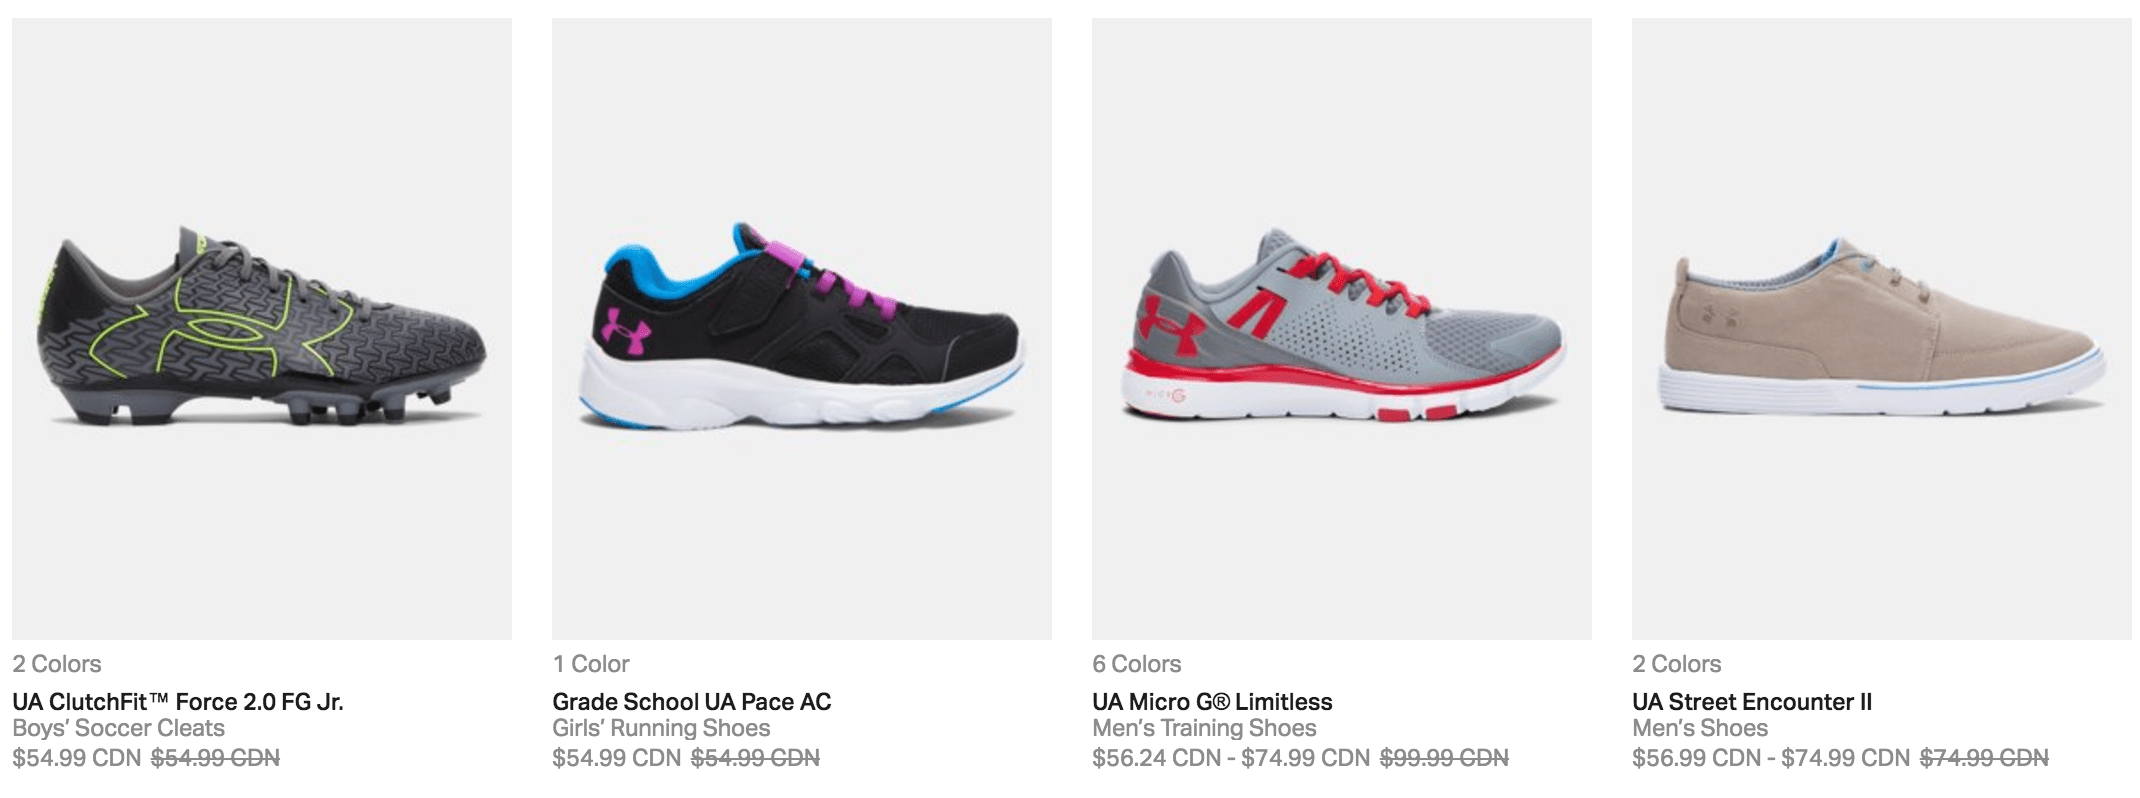 Under Armour Canada Outlet Sale + FREE Shipping on All Orders Using